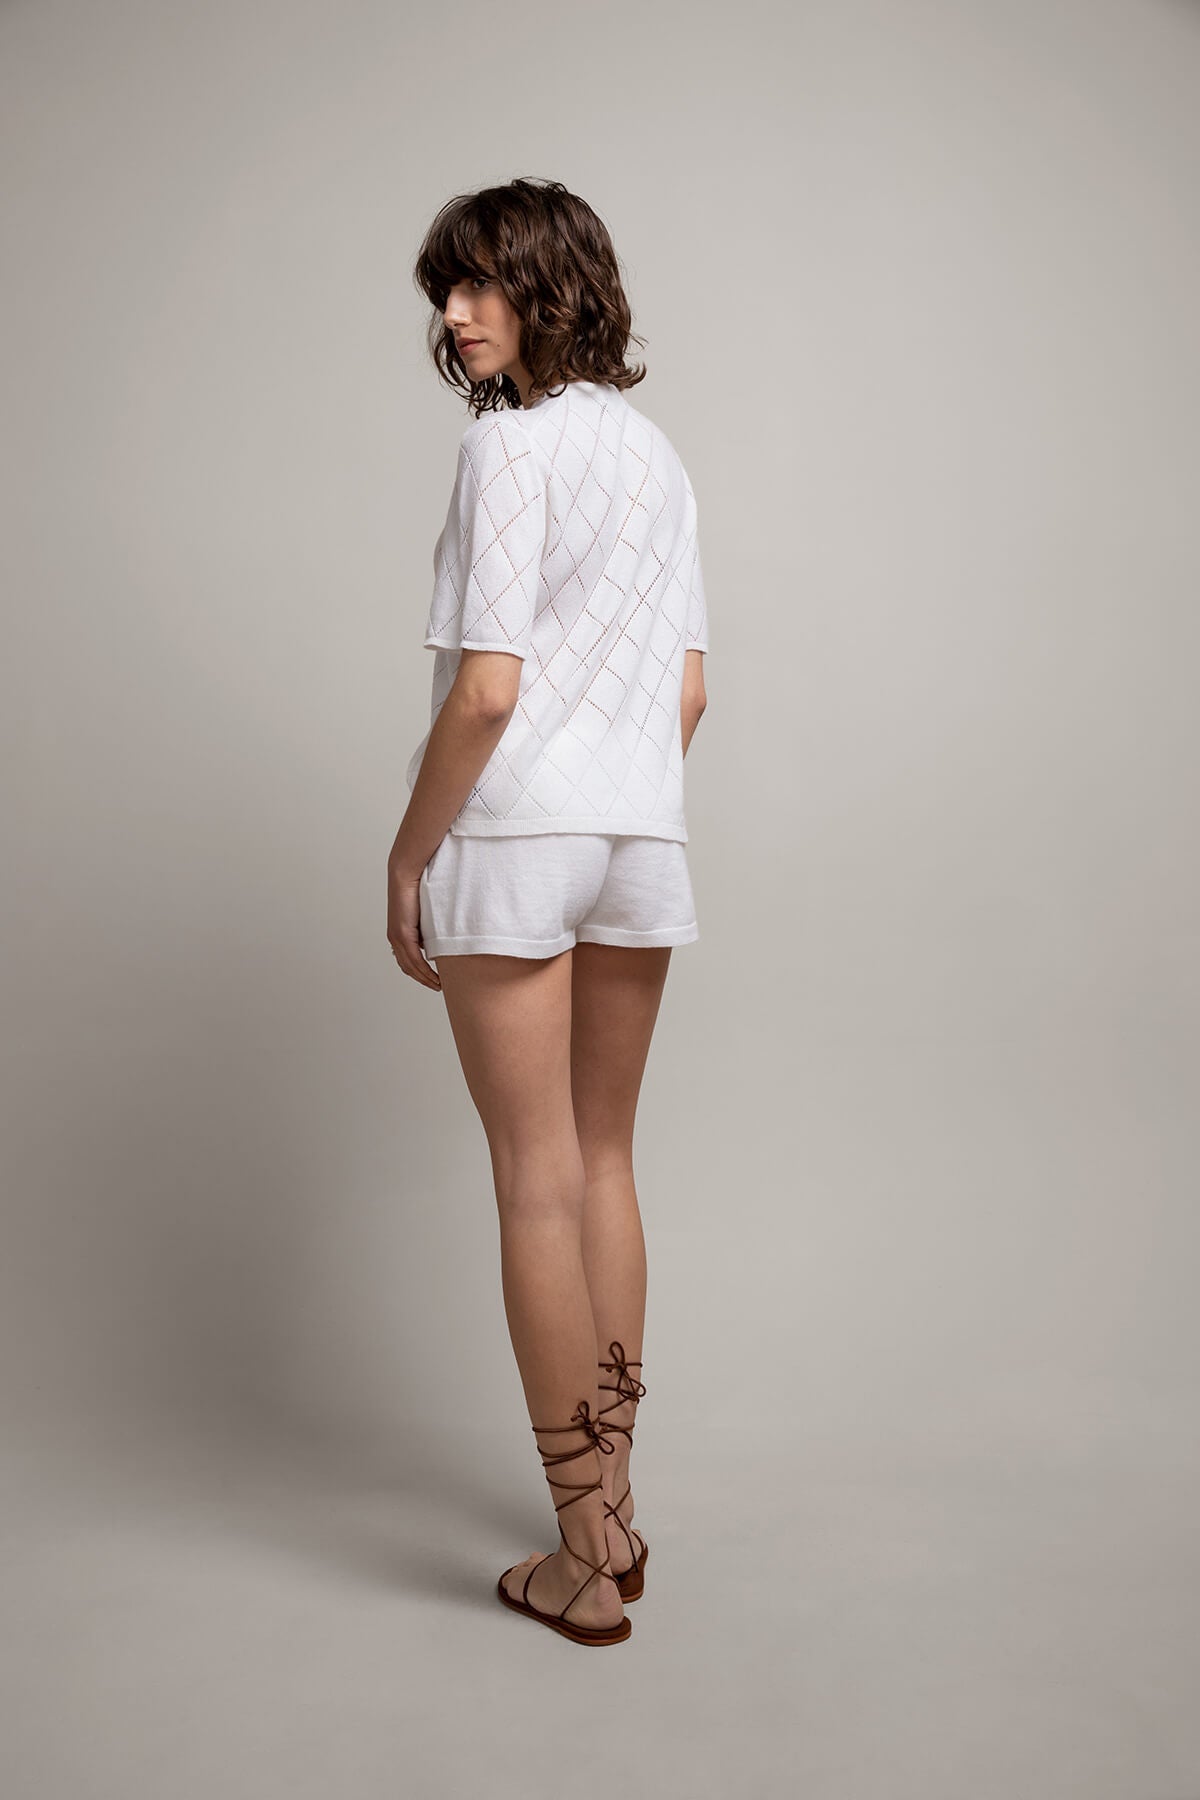 Back of Johnstons of Elgin Women’s Cashmere Camisole Shorts in Luna White on grey background KAI05078SA1911